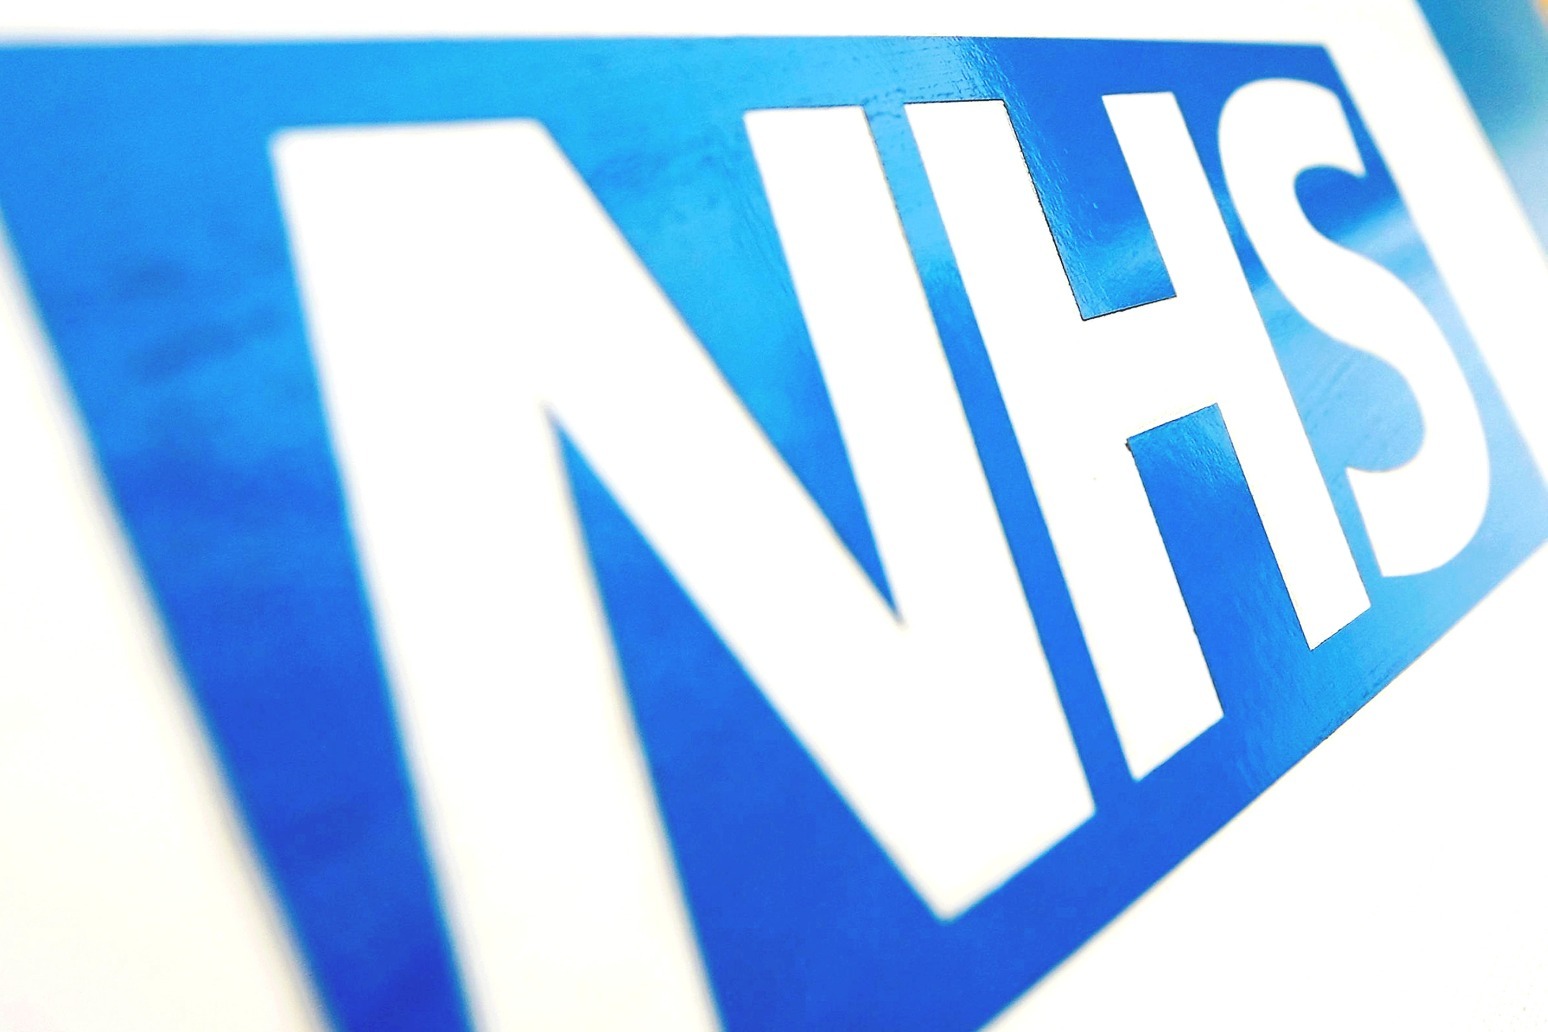 Warning of NHS 111 delays after cyber attack causes computer system outage 